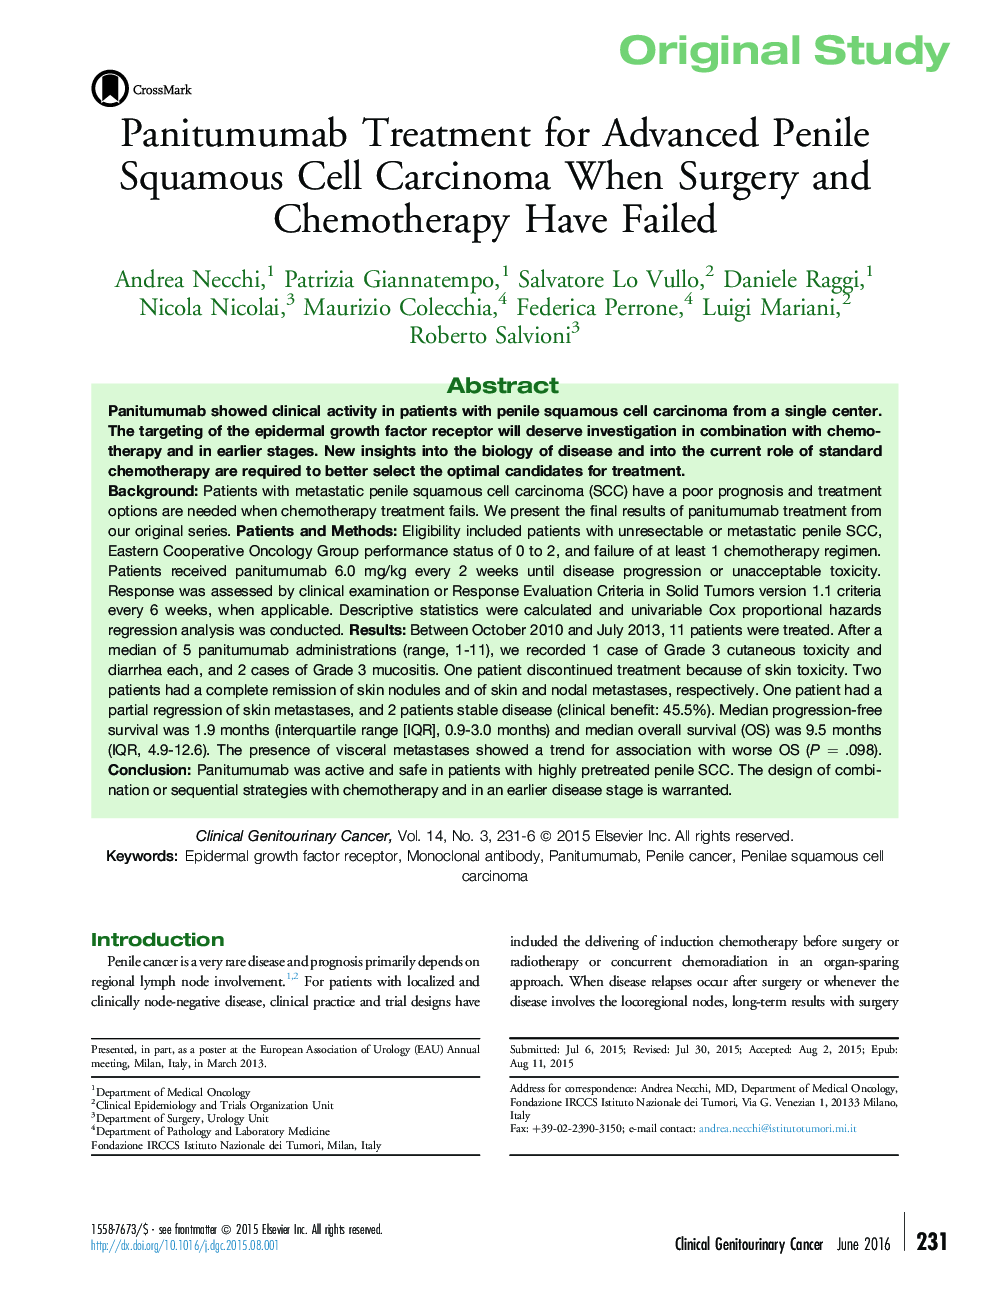 Panitumumab Treatment for Advanced Penile Squamous Cell Carcinoma When Surgery and Chemotherapy Have Failed